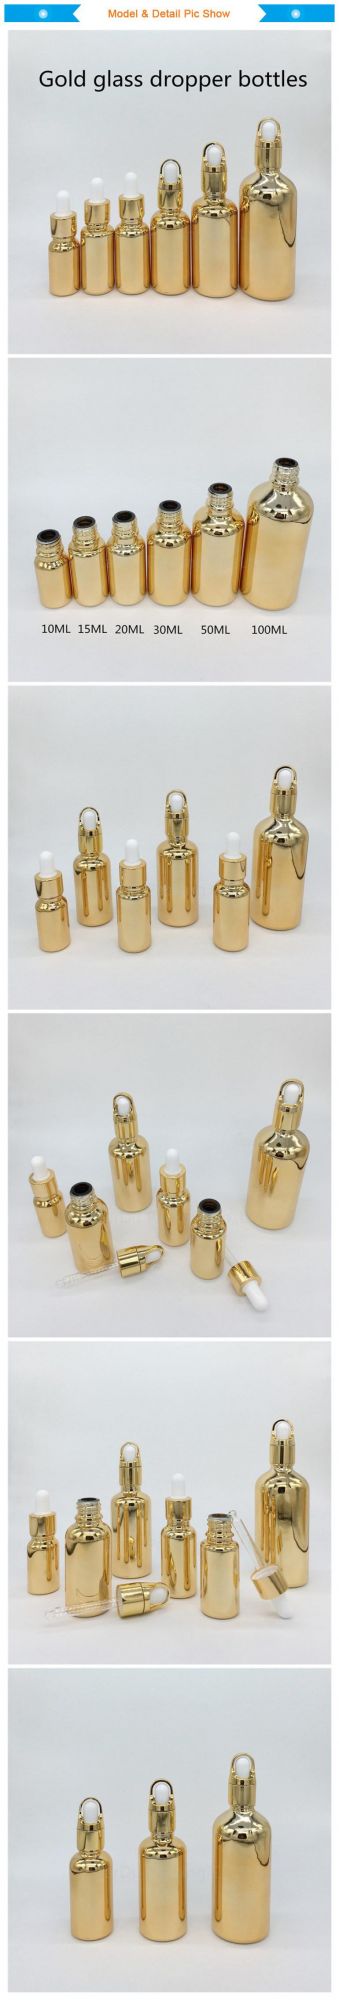 10ml-100ml Gold Perfume Glass Bottle with Dropper Essential Oil Bottle